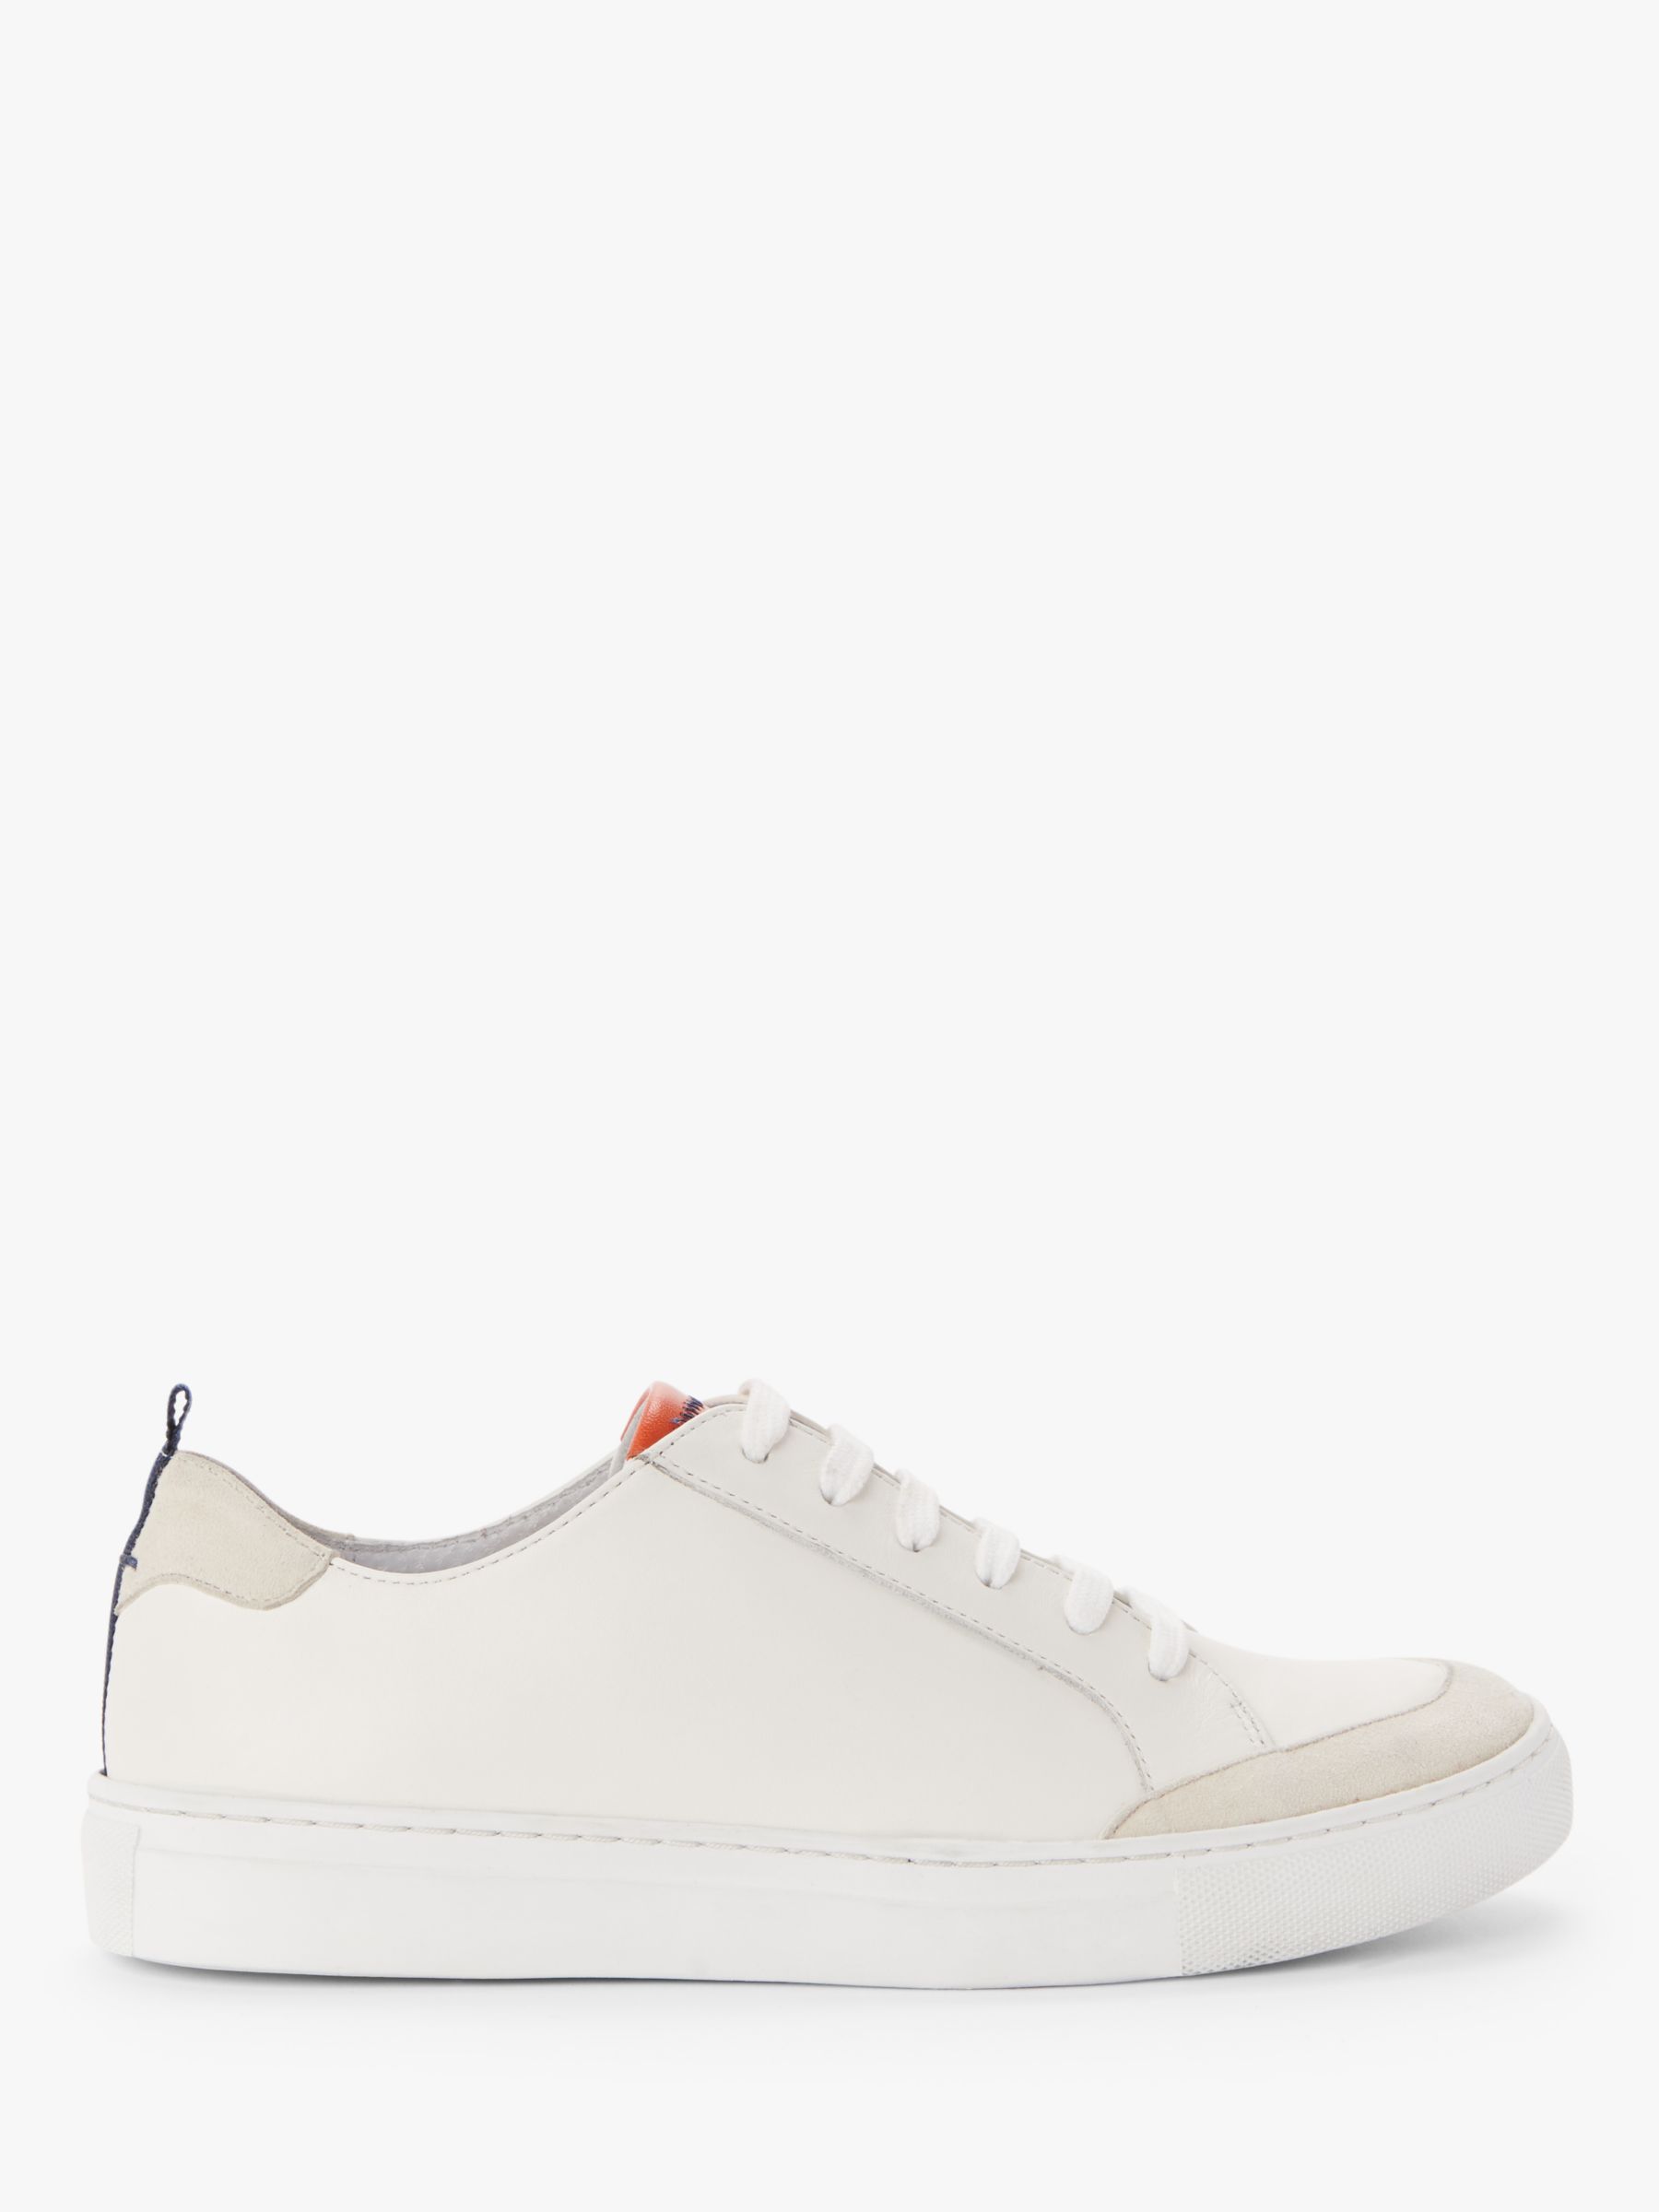 Kin Eliyah Leather Lace Up Trainers